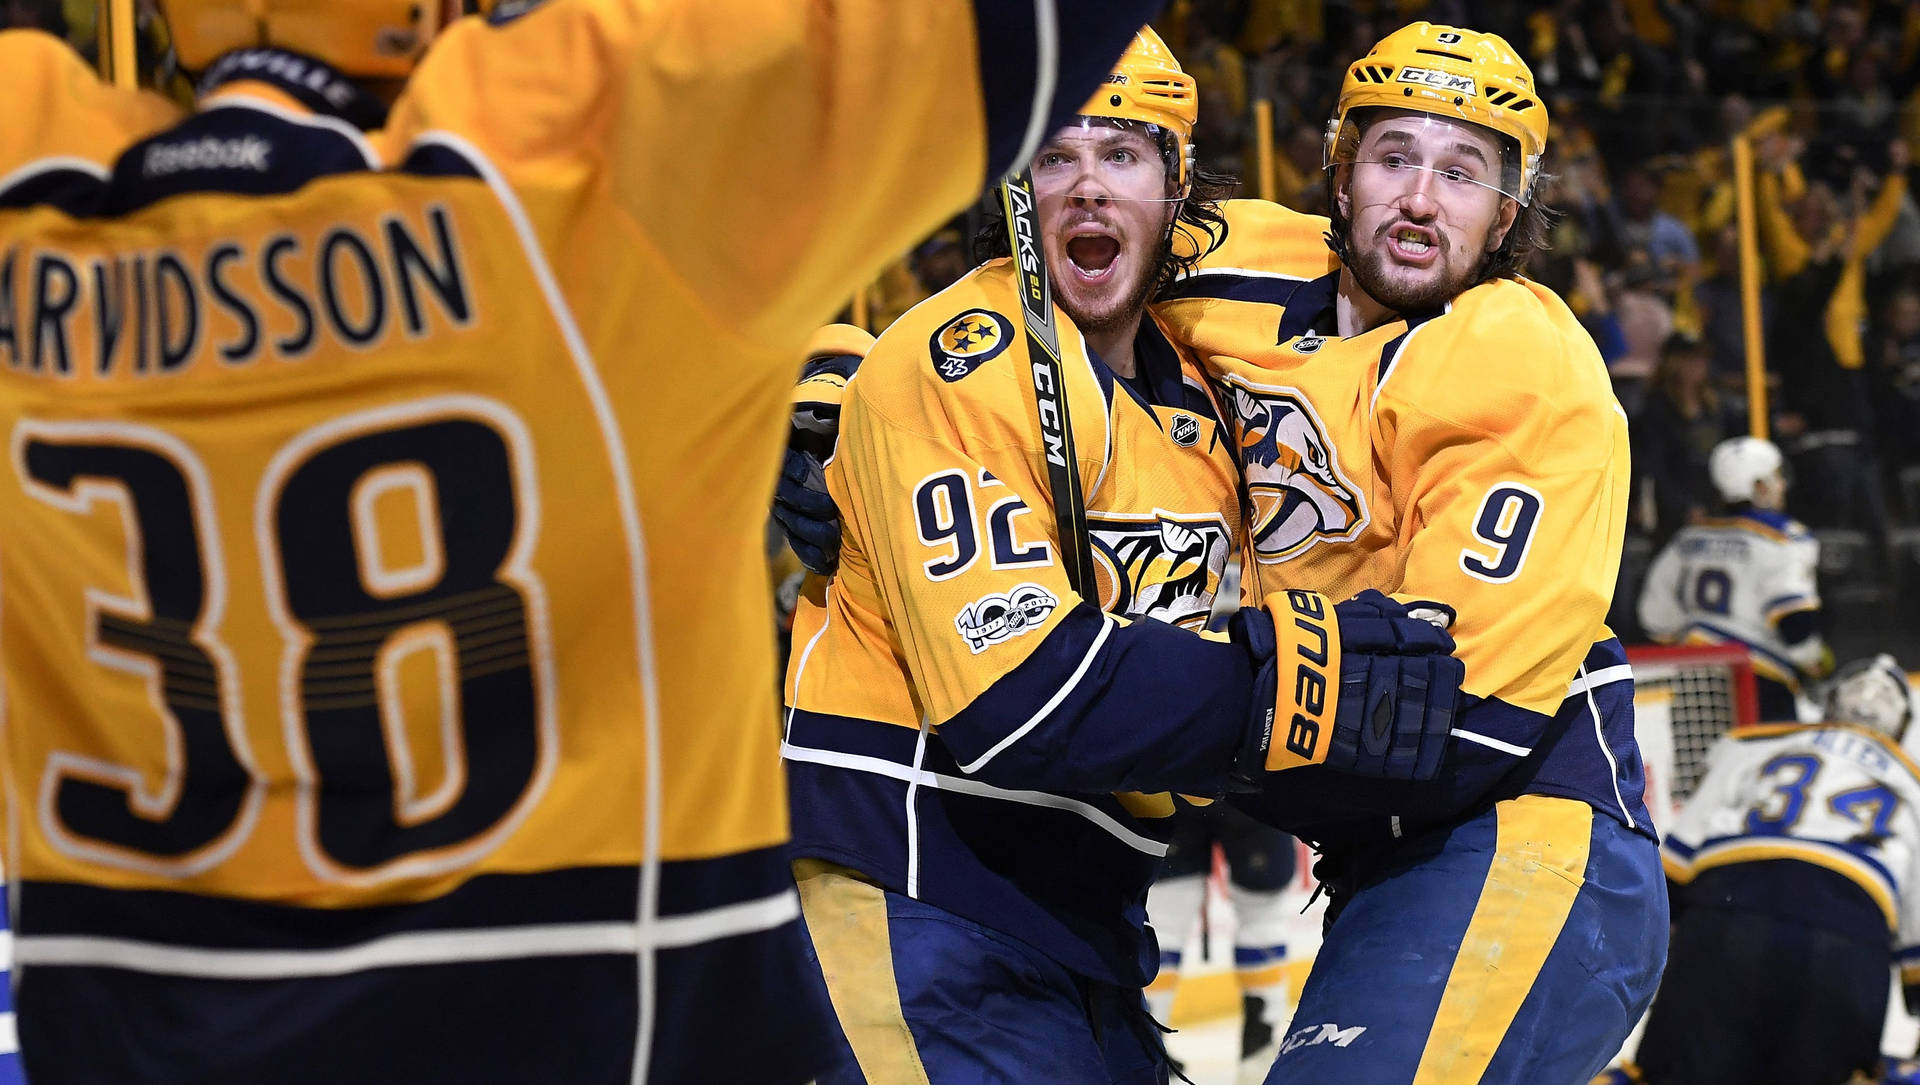 Ryan Johansen In Mid-celebration After A Prominent Win